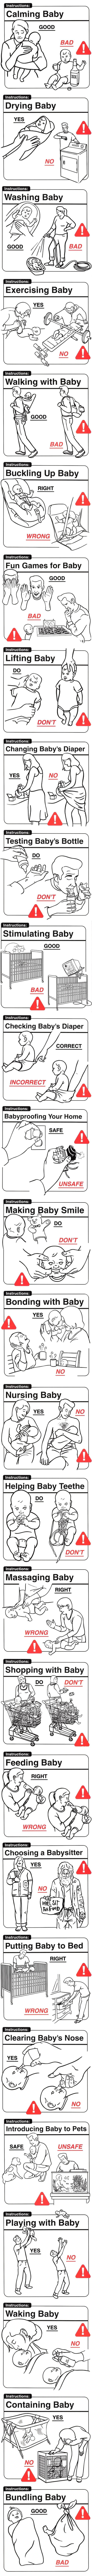 baby rearing, how to care for, instructions, do's and don't's